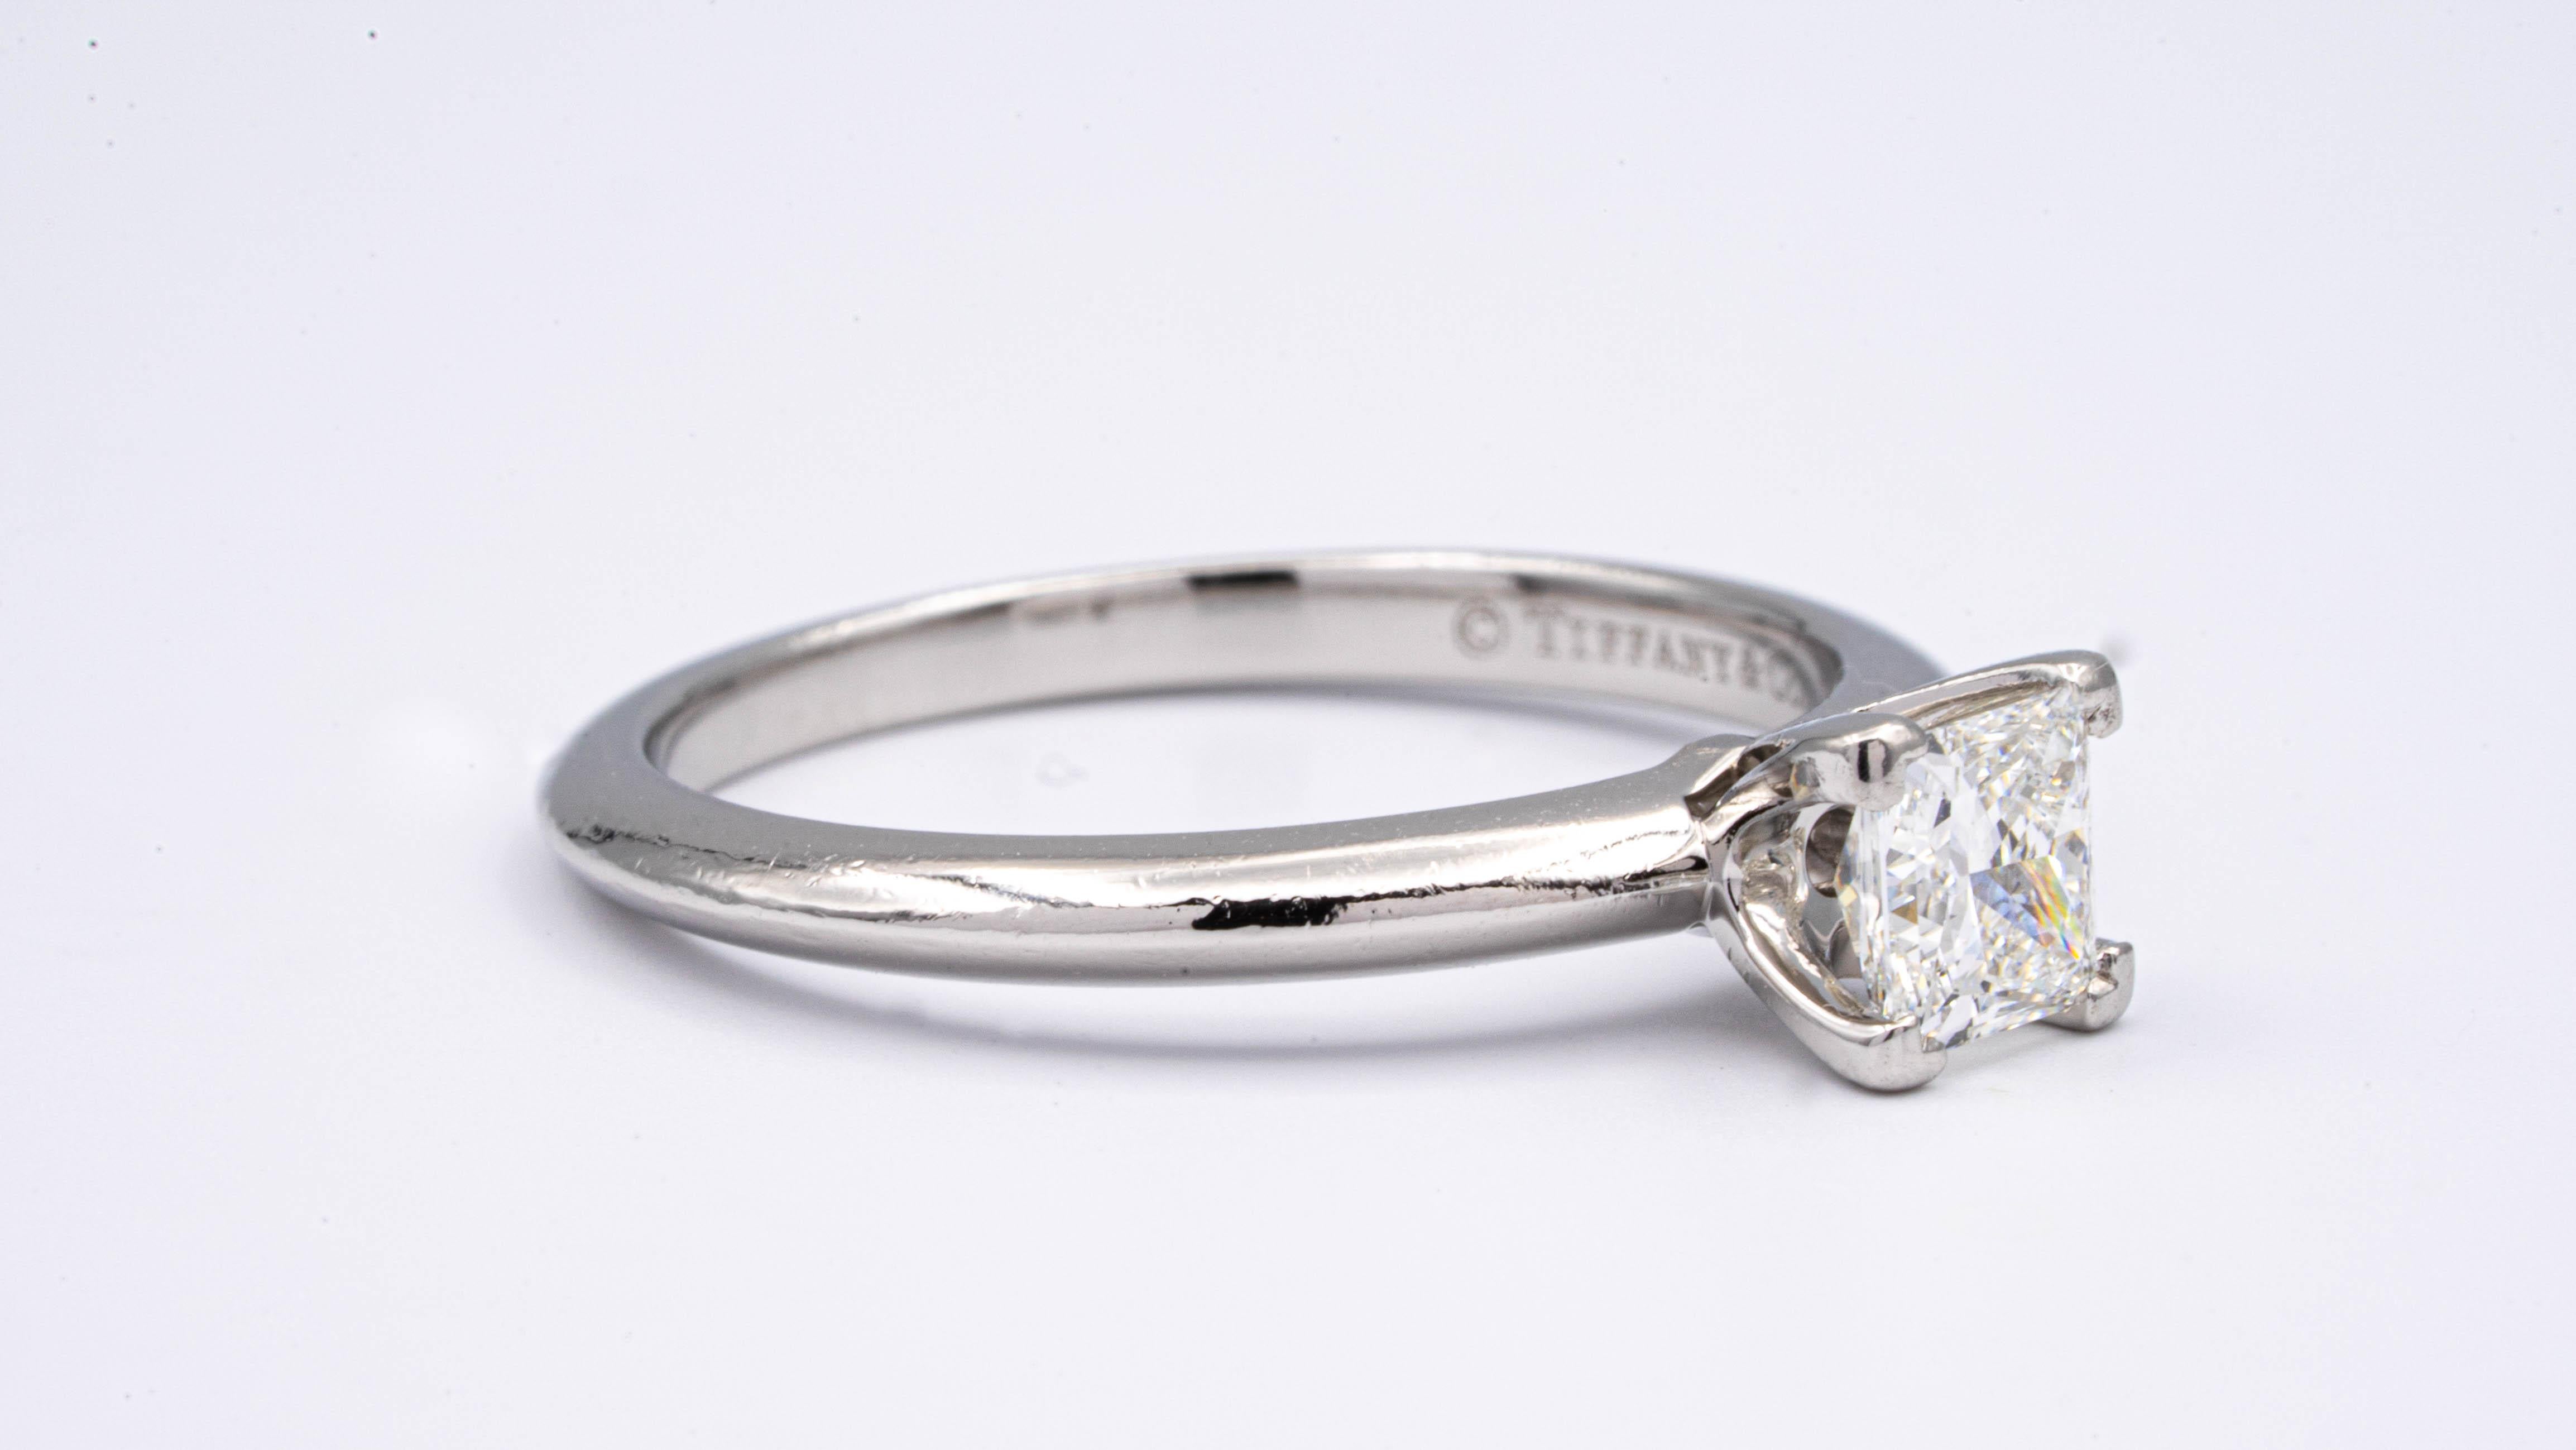 Classic Diamond Engagement Solitaire ring signed by Tiffany & Co. finely crafted in platinum featuring a 4 prong set 0.51 carat  Center princess cut diamond graded by Tiffany H color , and fine VVS1 Clarity. 

Stamped: Tiffany & Co. PT 950 